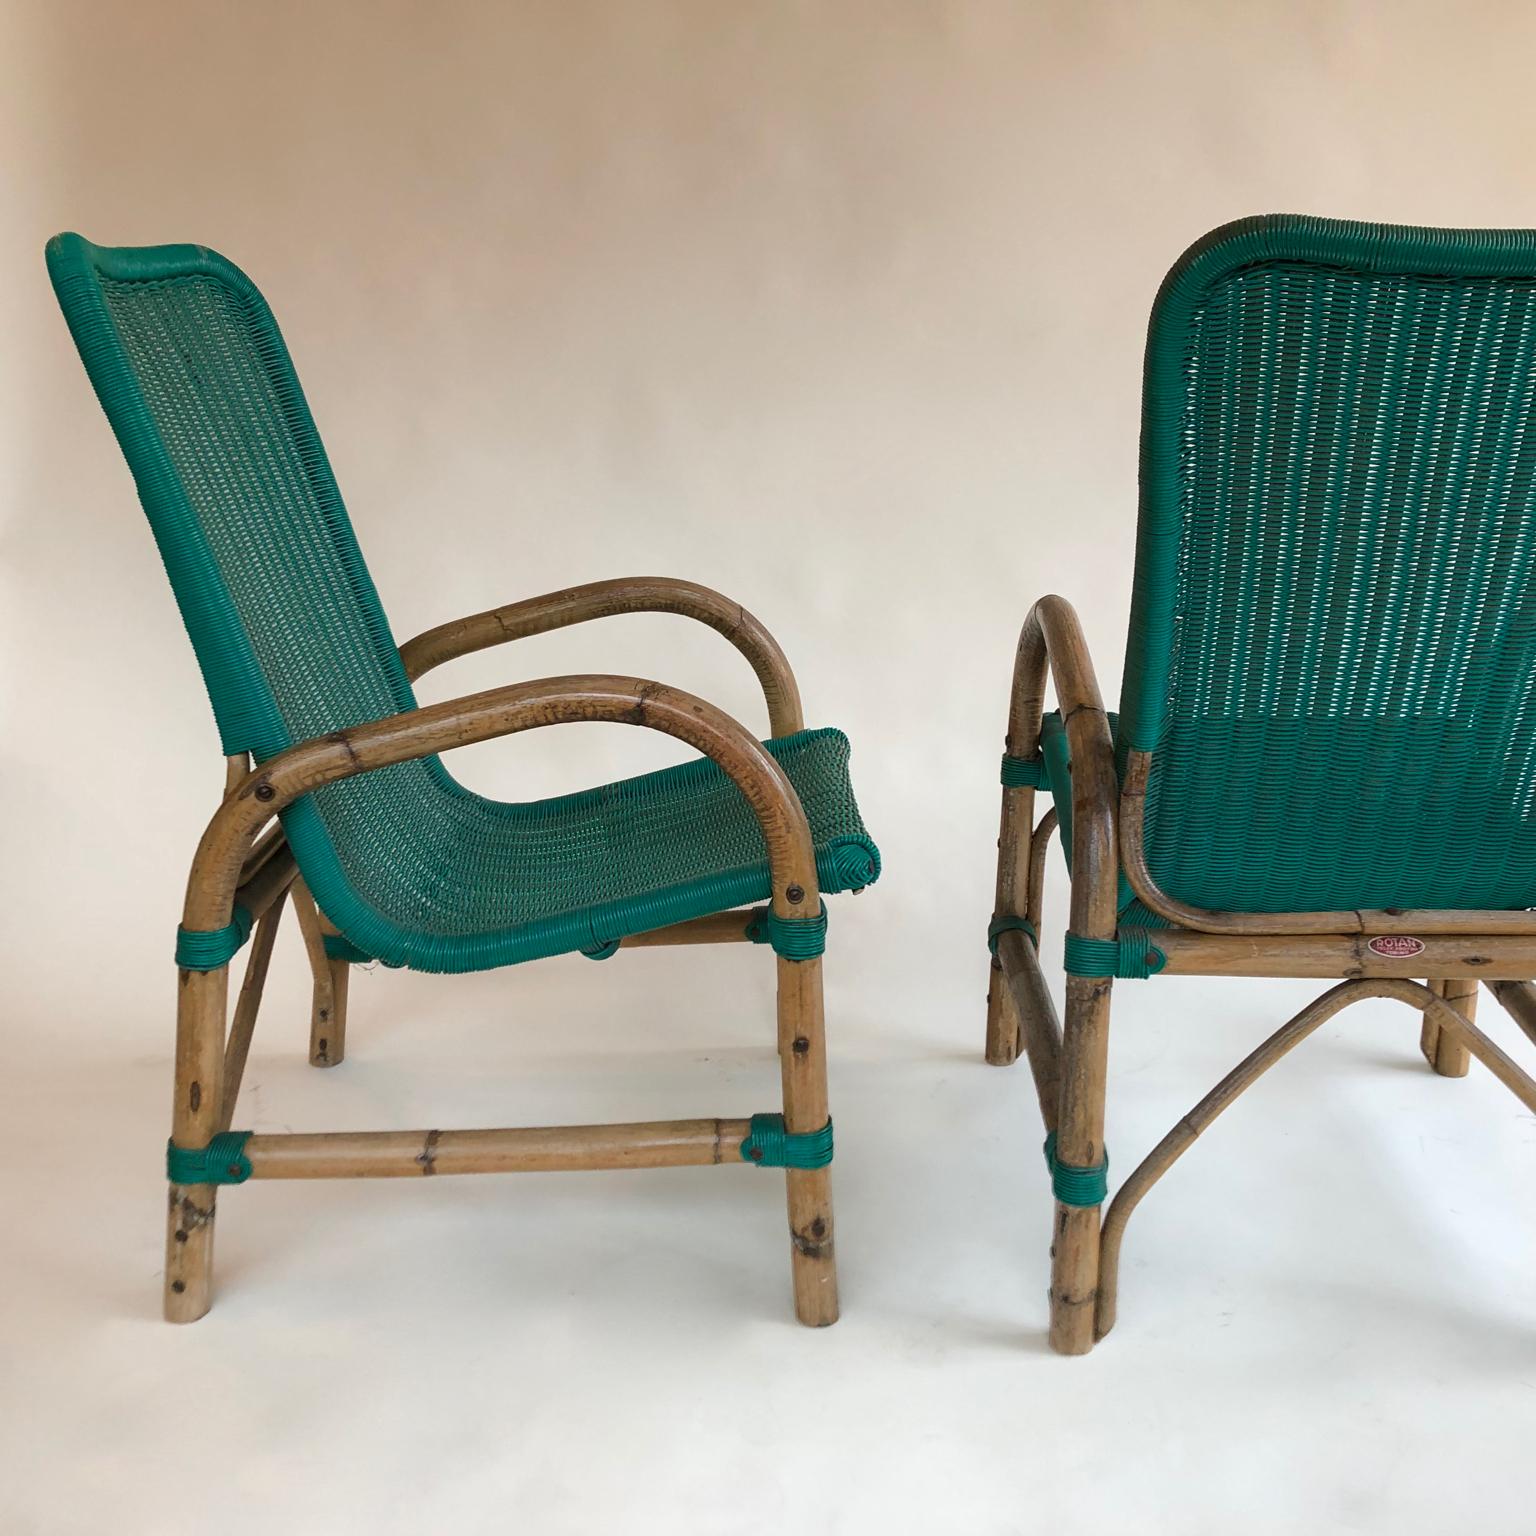 Mid-Century Modern Bamboo Armchairs with Green Seats, circa 1960s, a Pair by Rotan, Torino